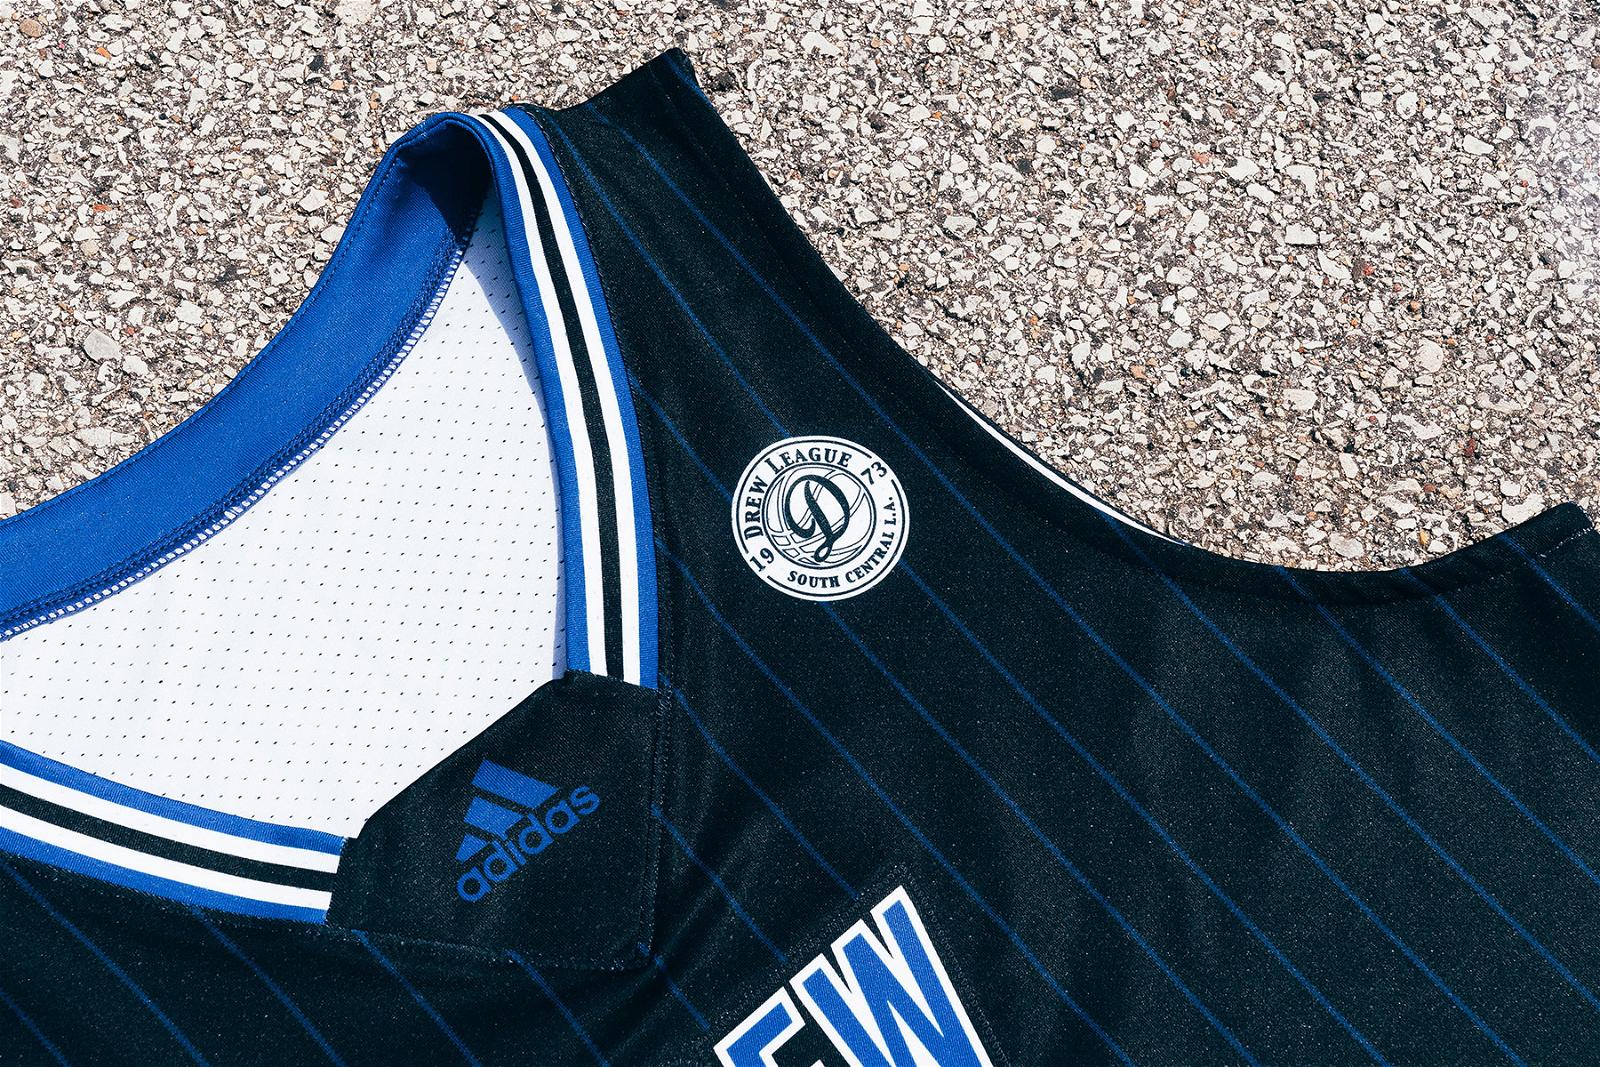 Drew League partners with adidas, drops new jerseys 